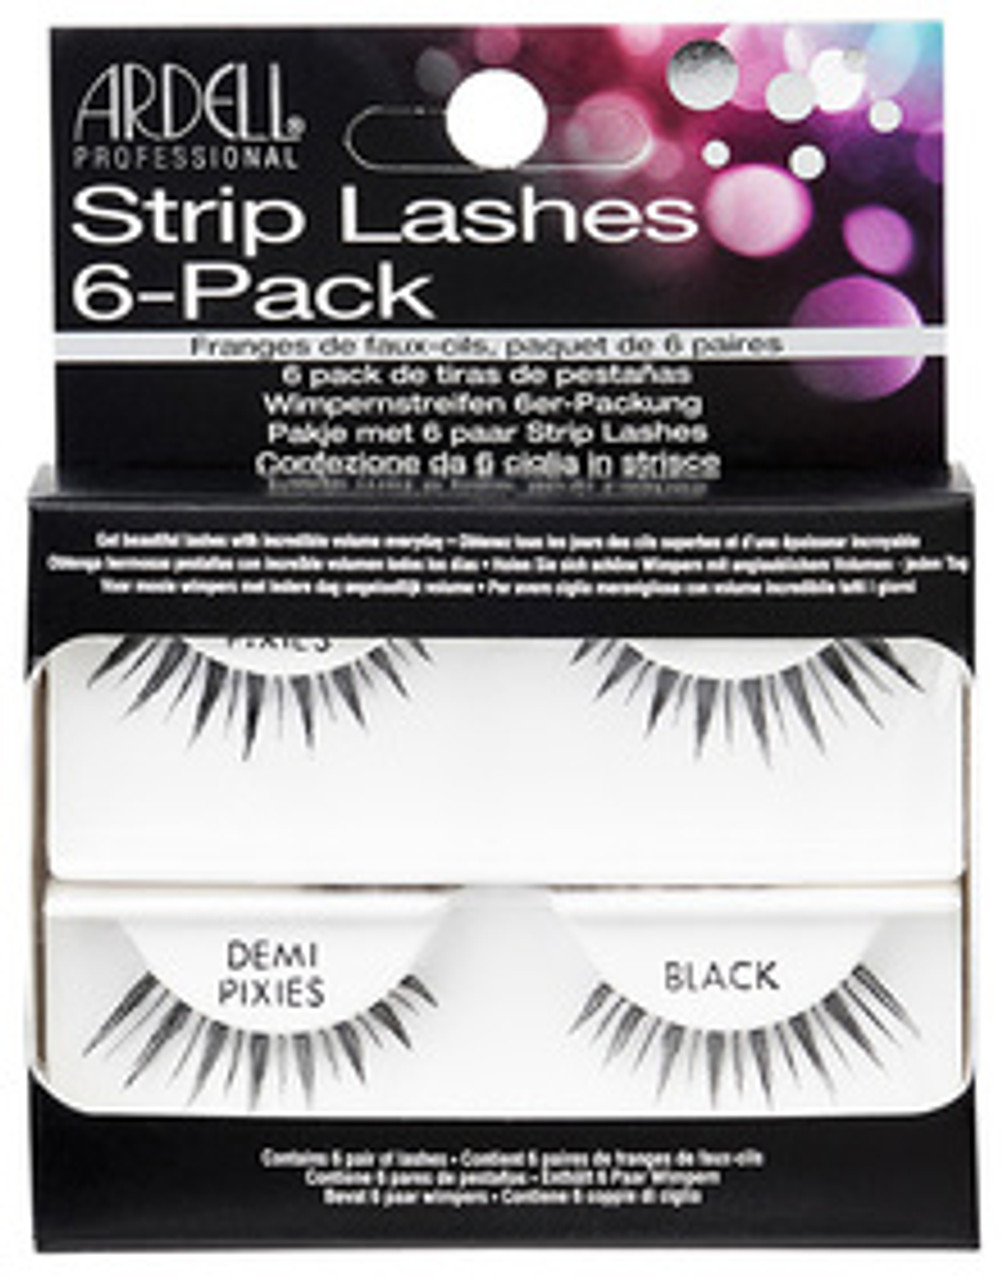 Ardell Strip Lashes 6-Pack - Natural Demi Pixies Black